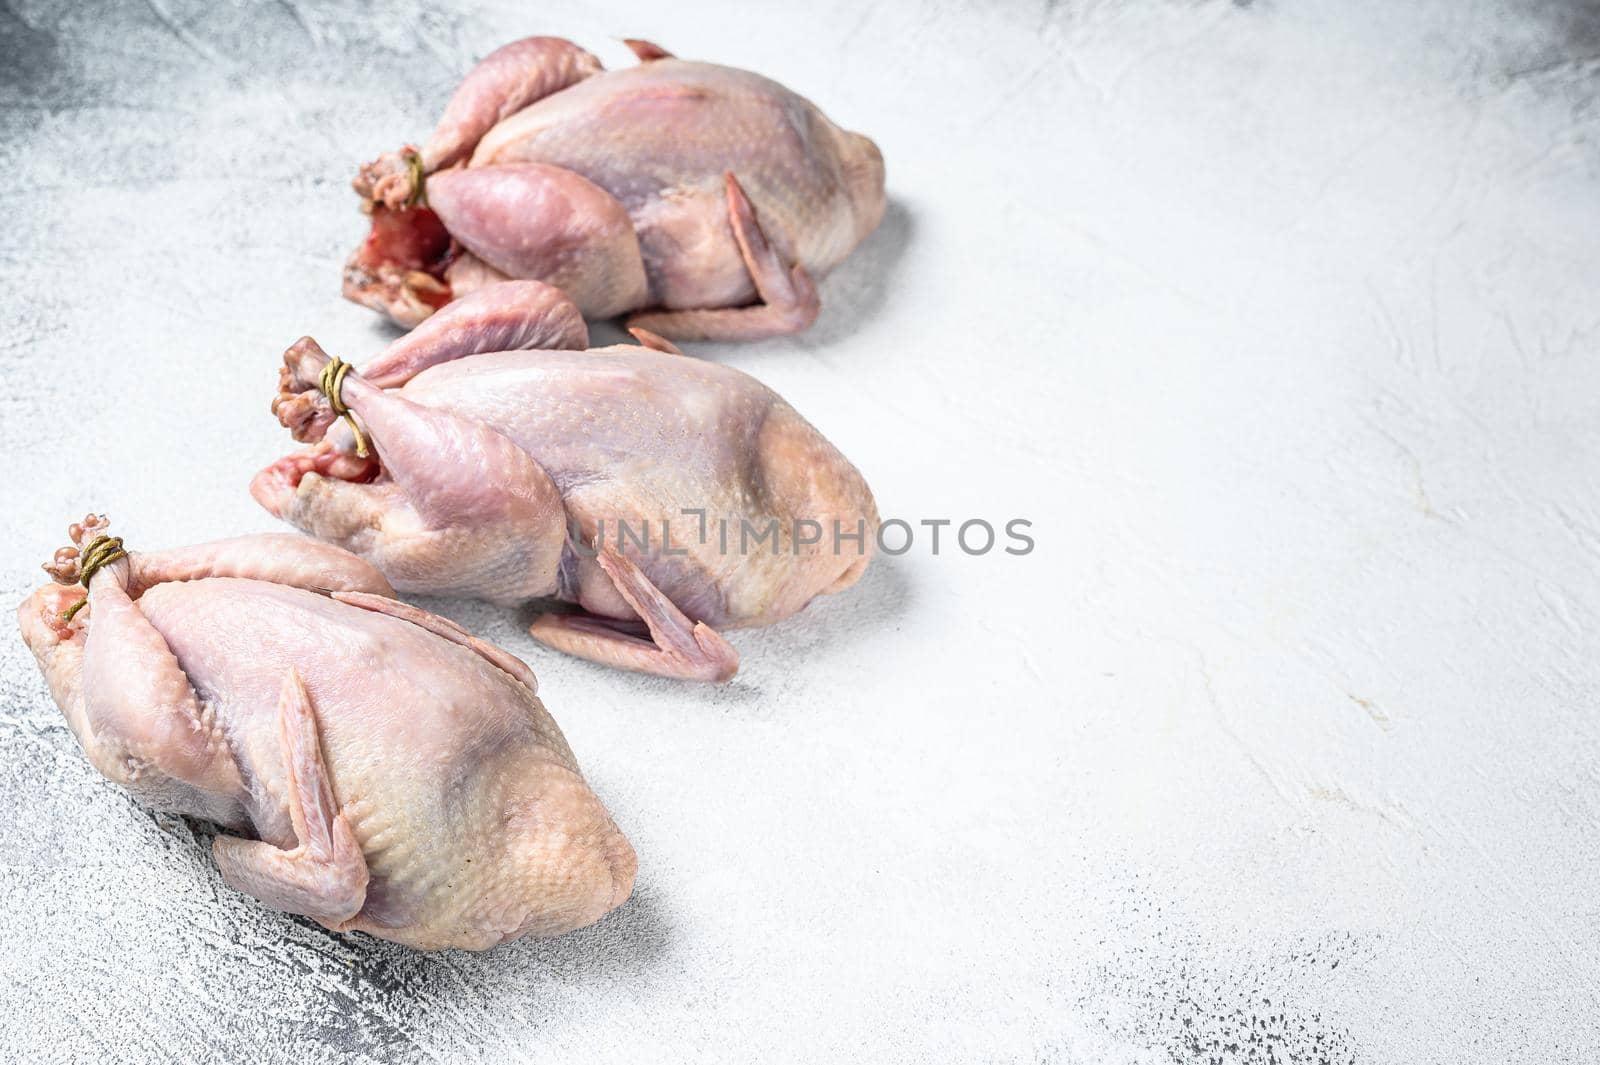 Raw quails on a kitchen table. White background. Top view. Copy space.